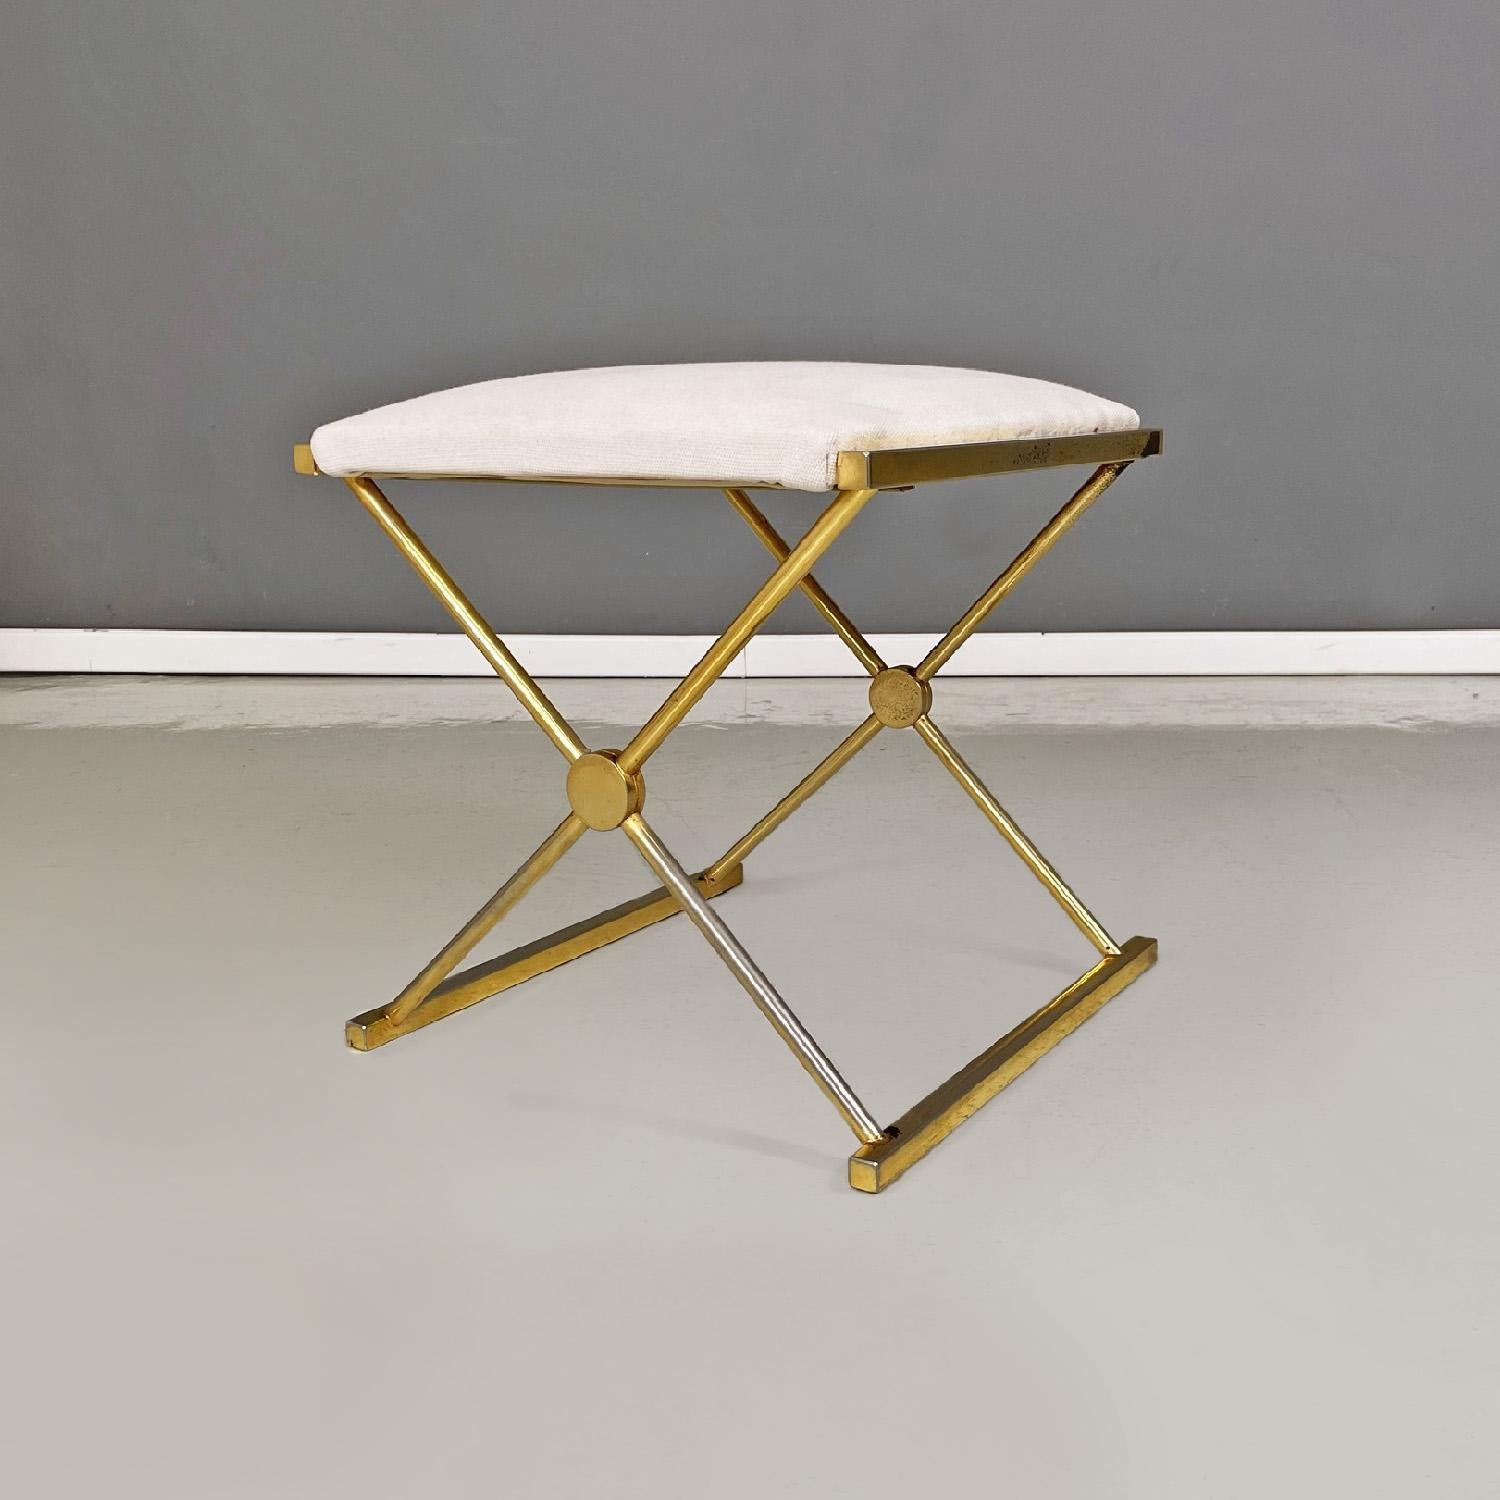 Modern Italian modern stools in golden metal and white fabric, 1980s For Sale